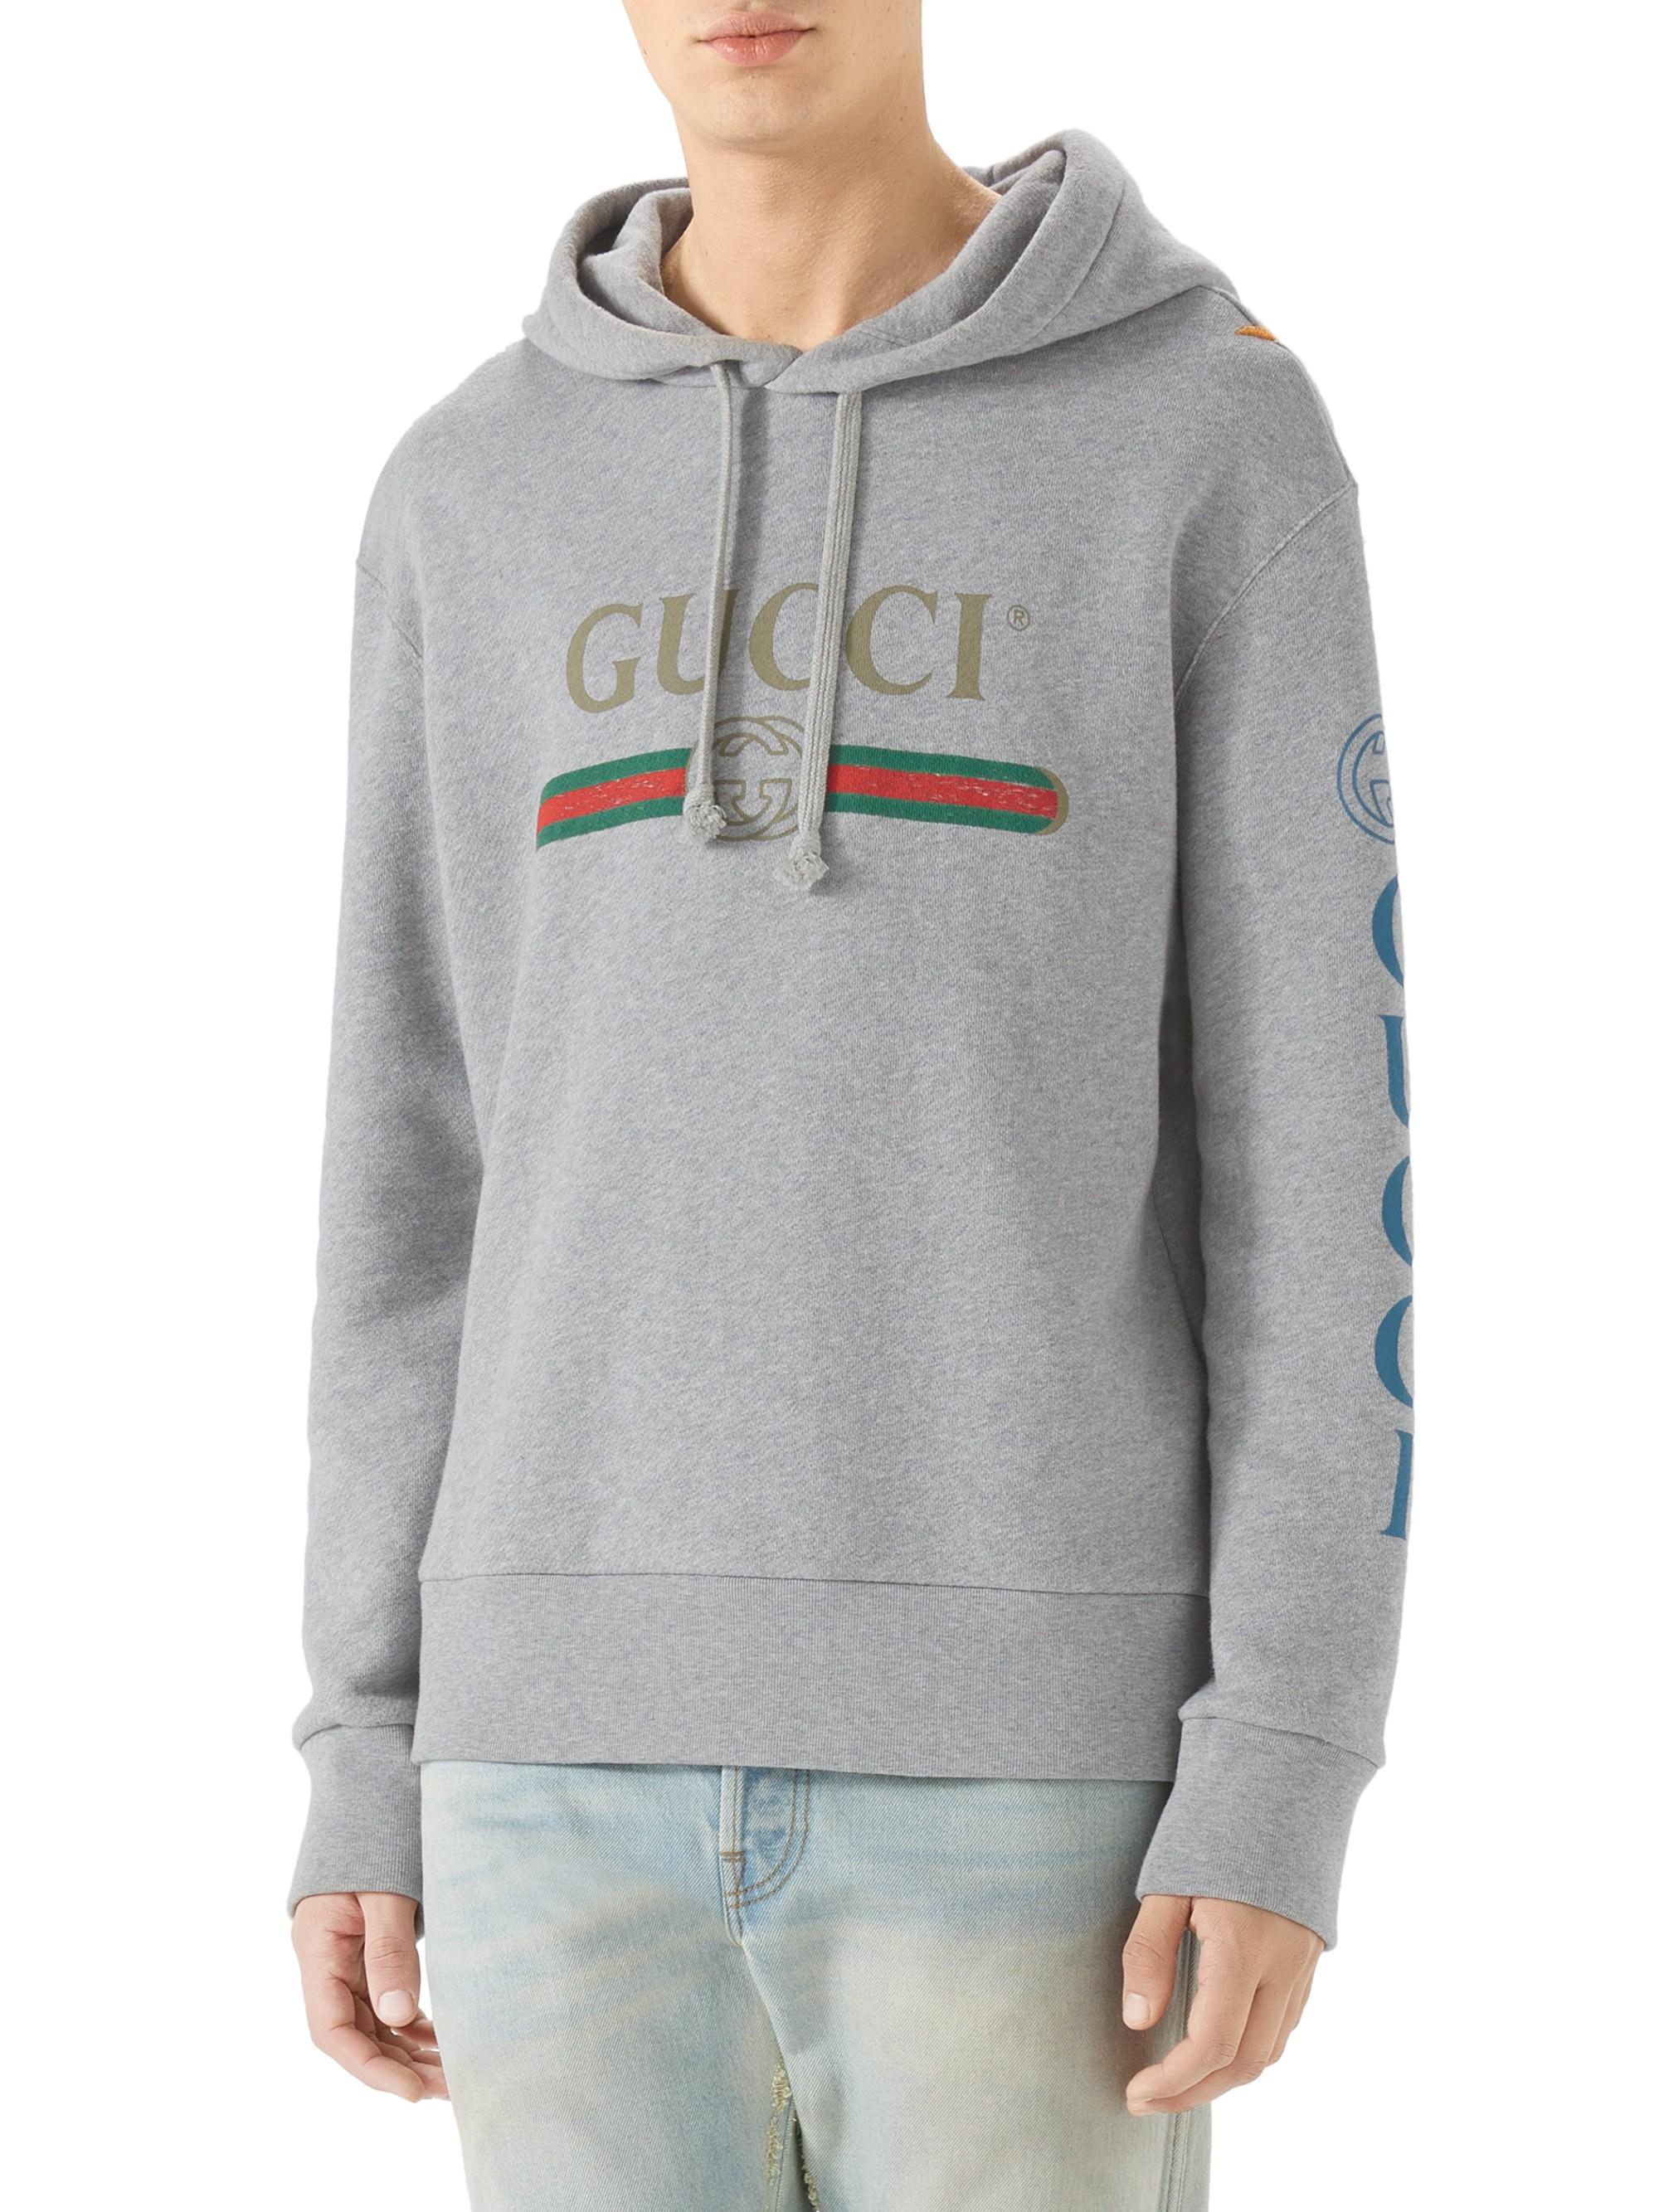 gray gucci hoodie,Limited Time Offer,slabrealty.com